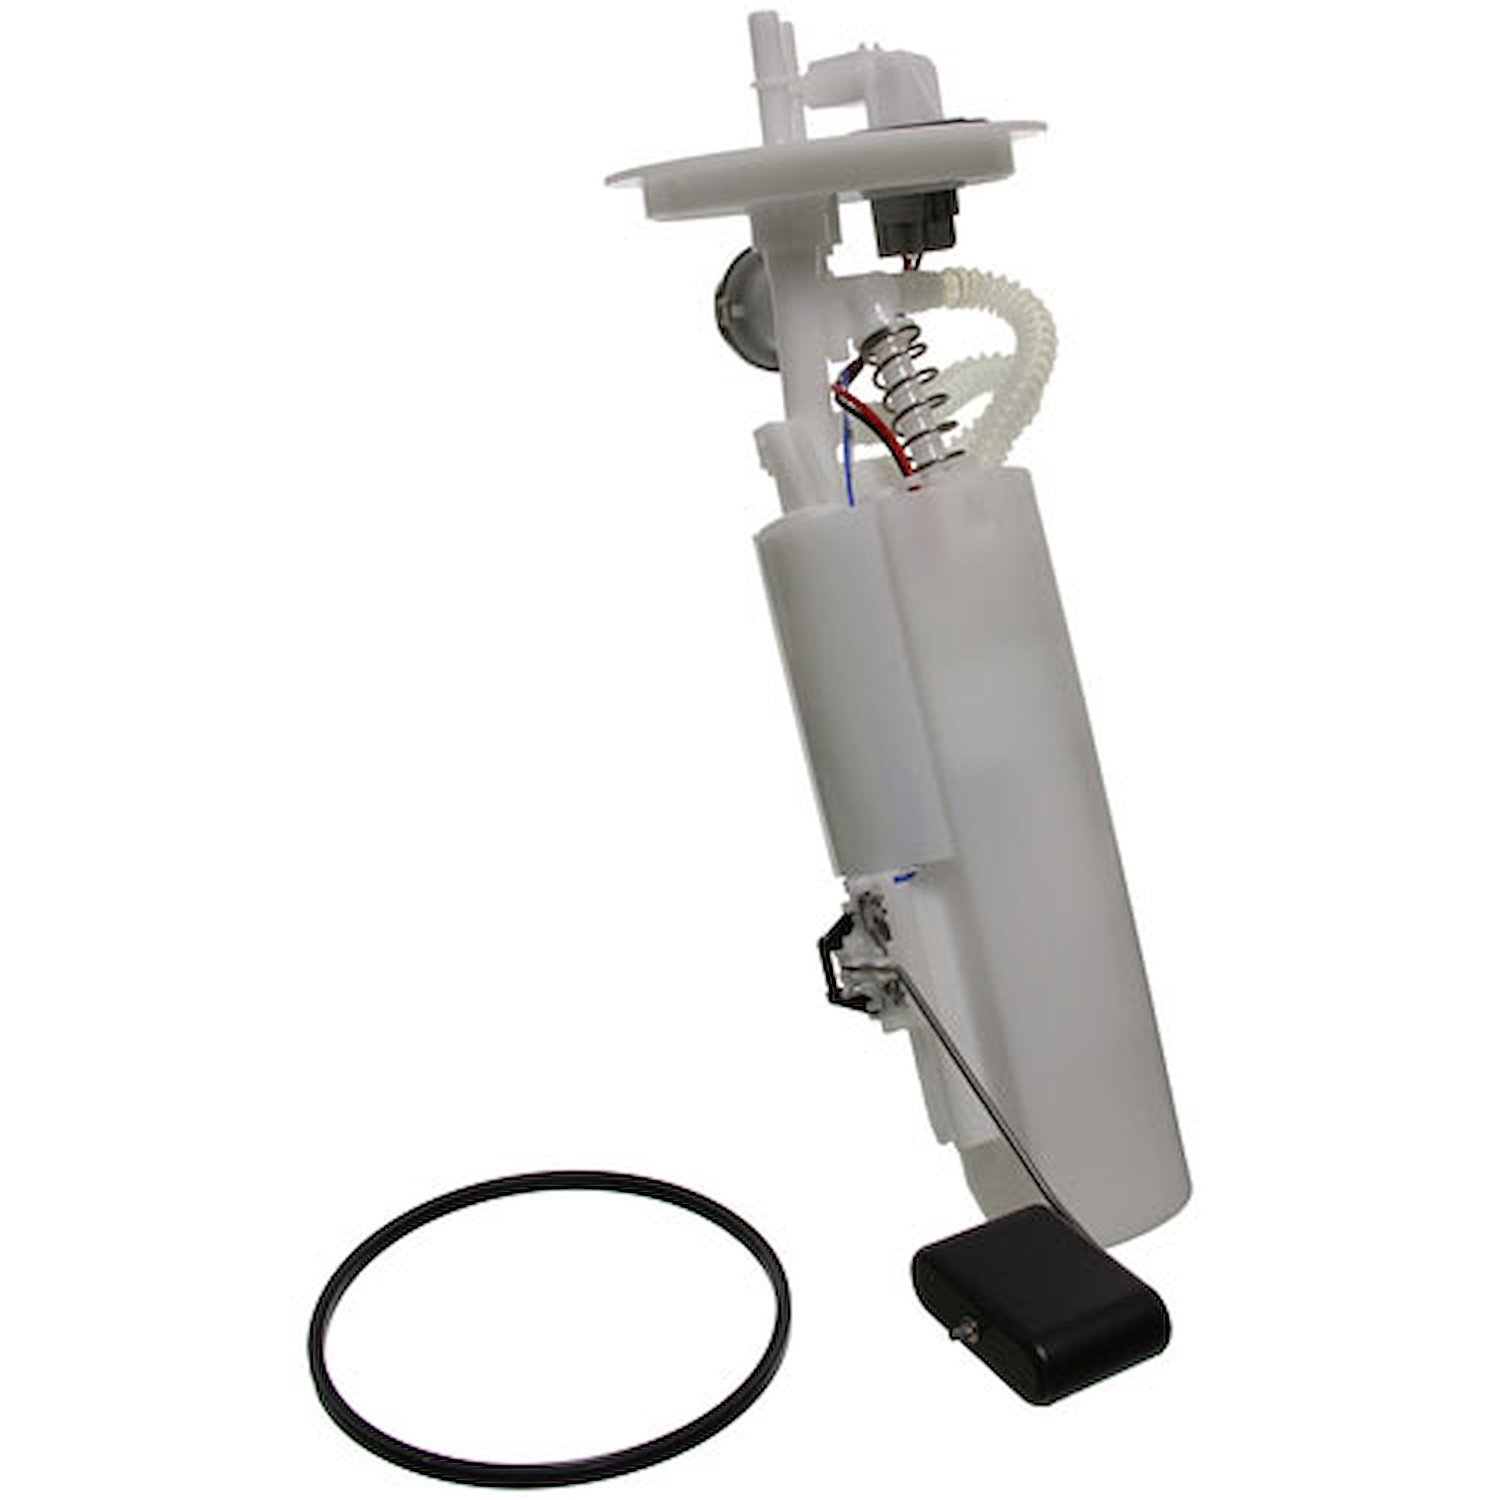 OE Chrysler/Dodge Replacement Electric Fuel Pump Module Assembly 1996-00 Chrysler Grand Voyager/Town&Country/Voyager